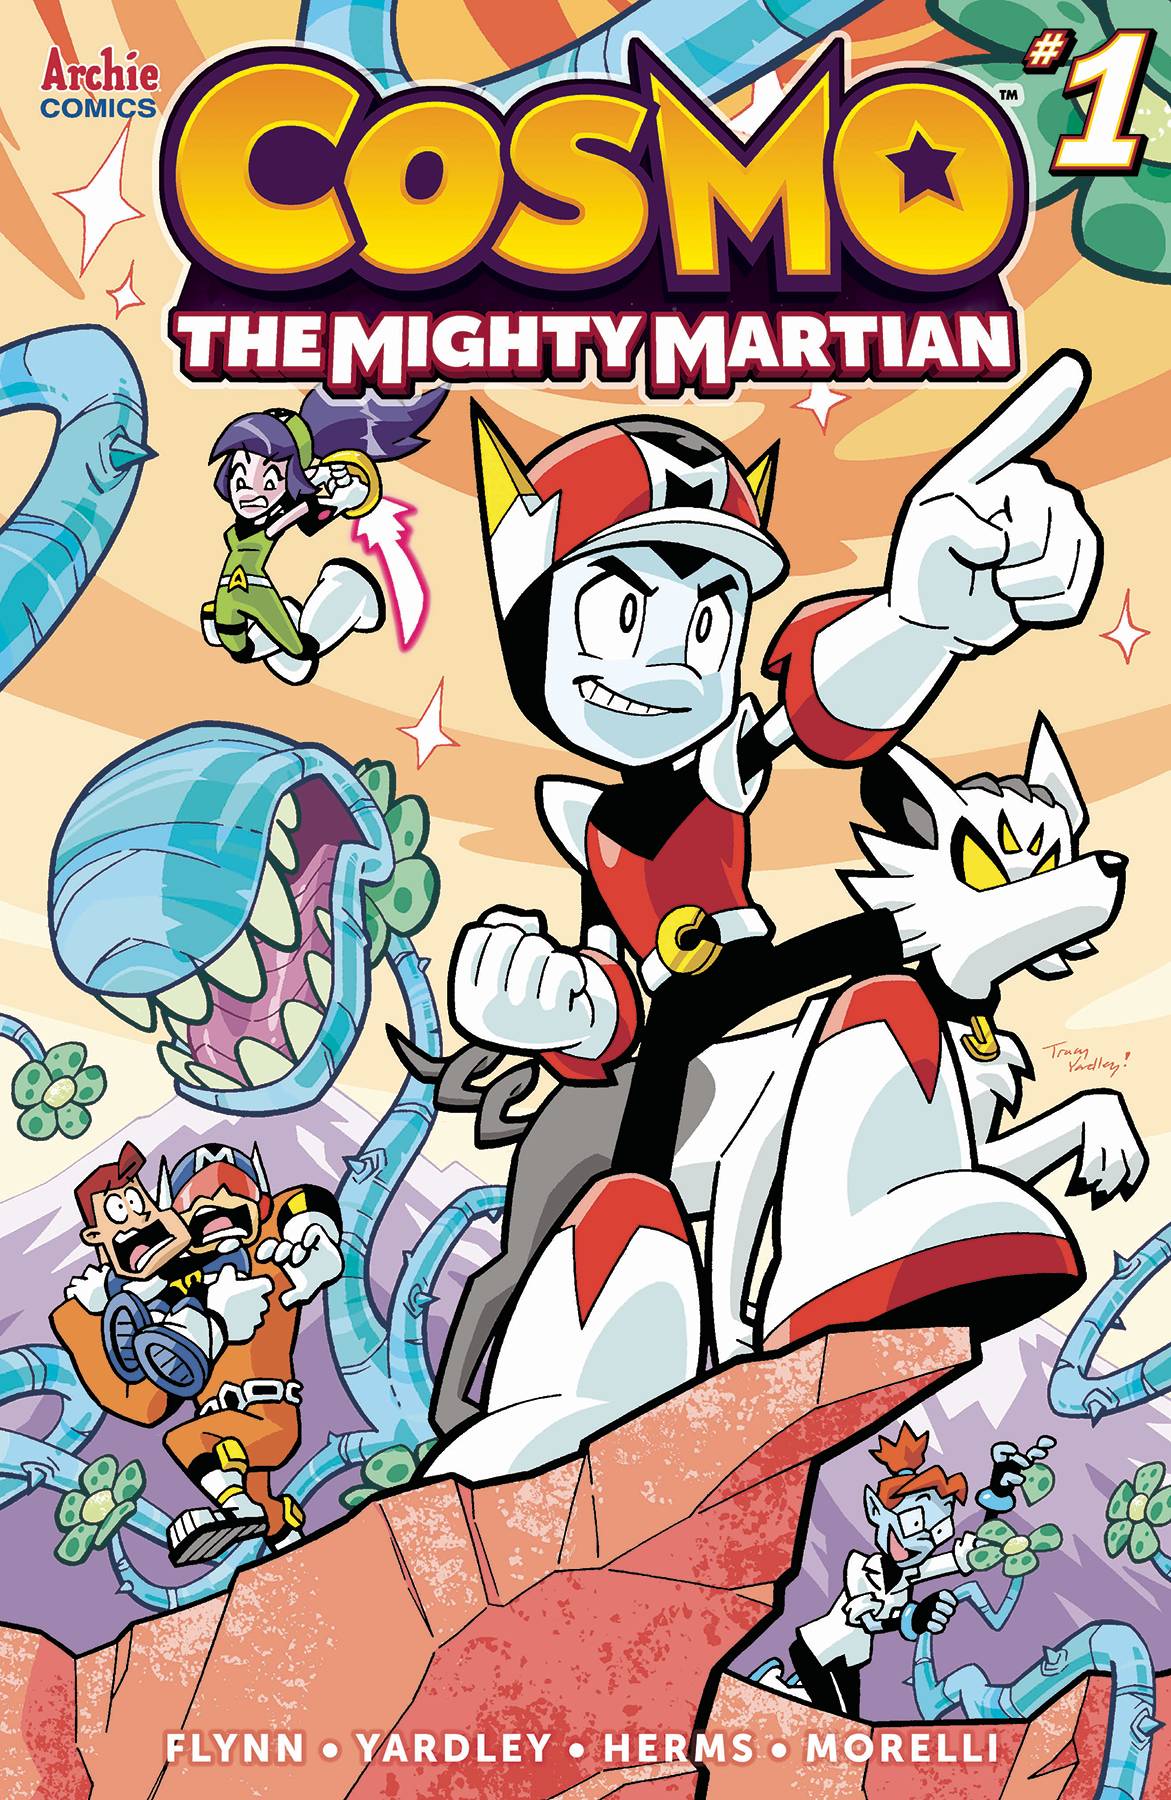 Cosmo Mighty Martian #1 Cover A Yardley (Of 5)